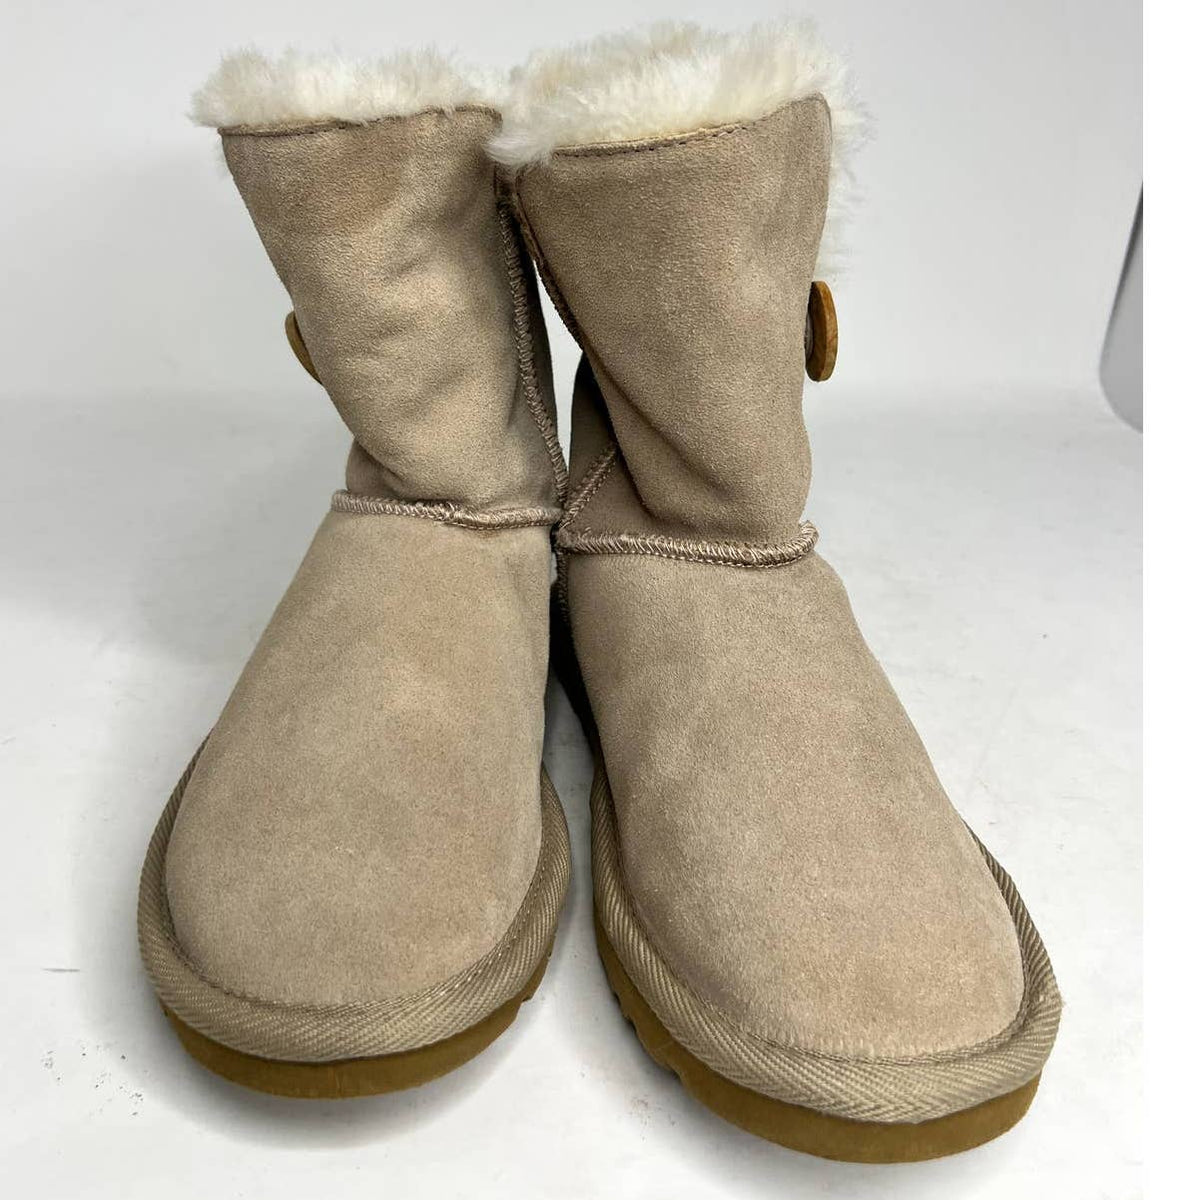 Ugg Bailey Button Sand Suede Boots Sz.6